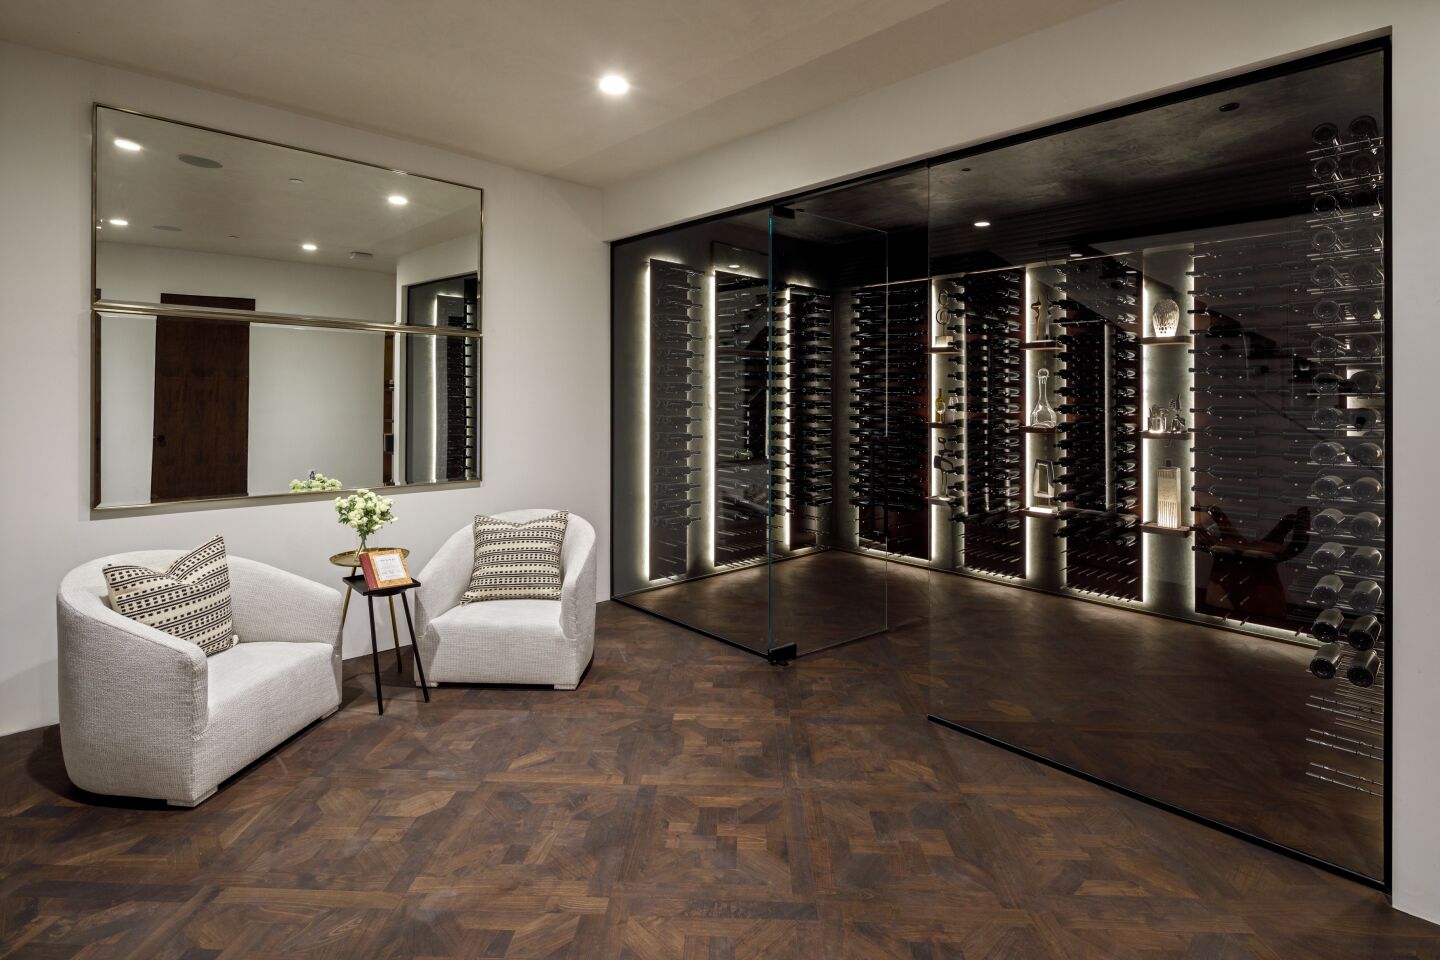 The wine cellar can hold up to 1,200 bottles.